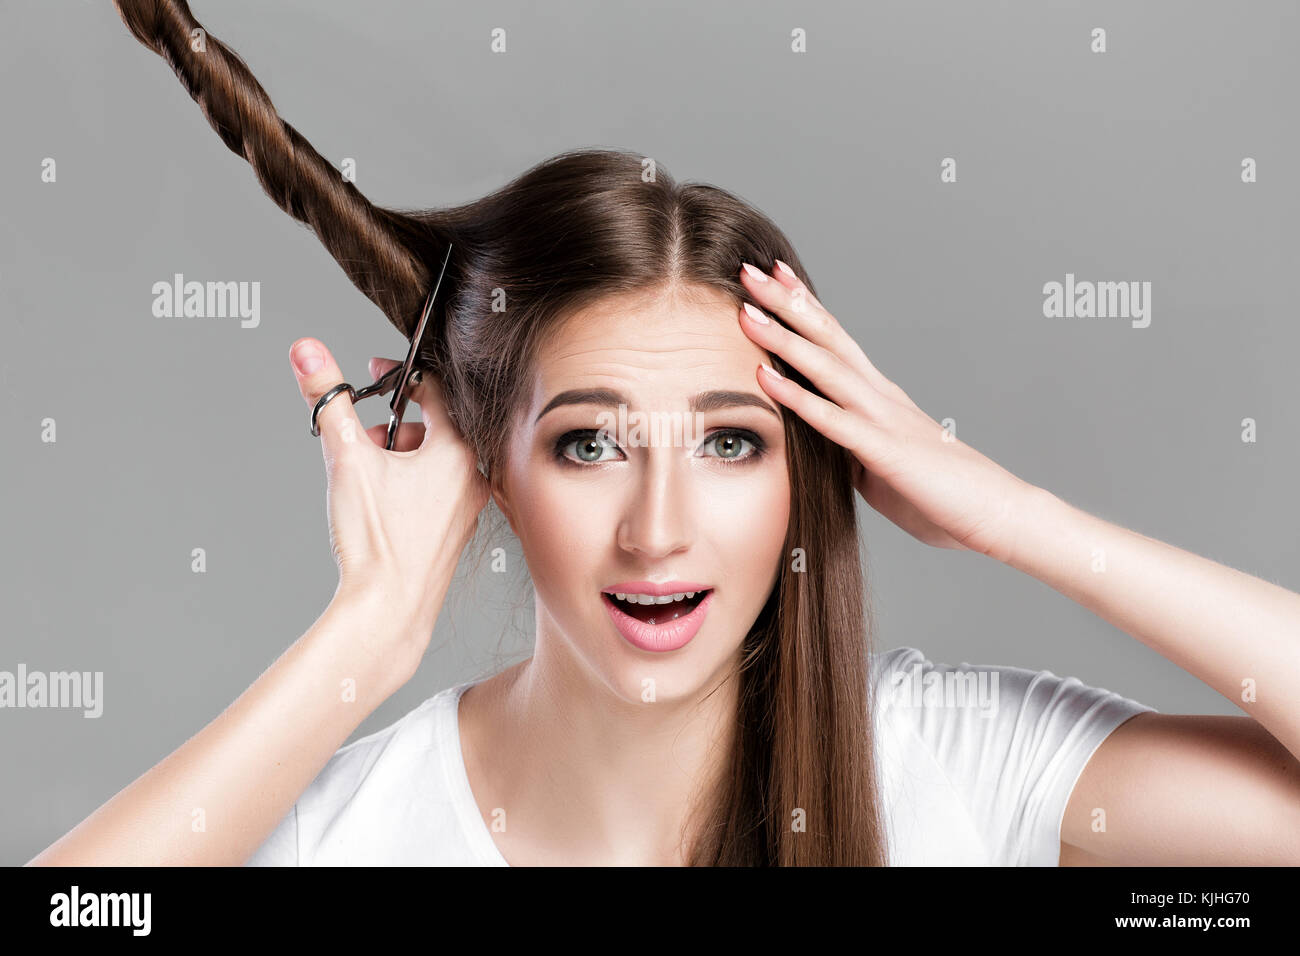 woman with  long hair holds scissors  Stock Photo